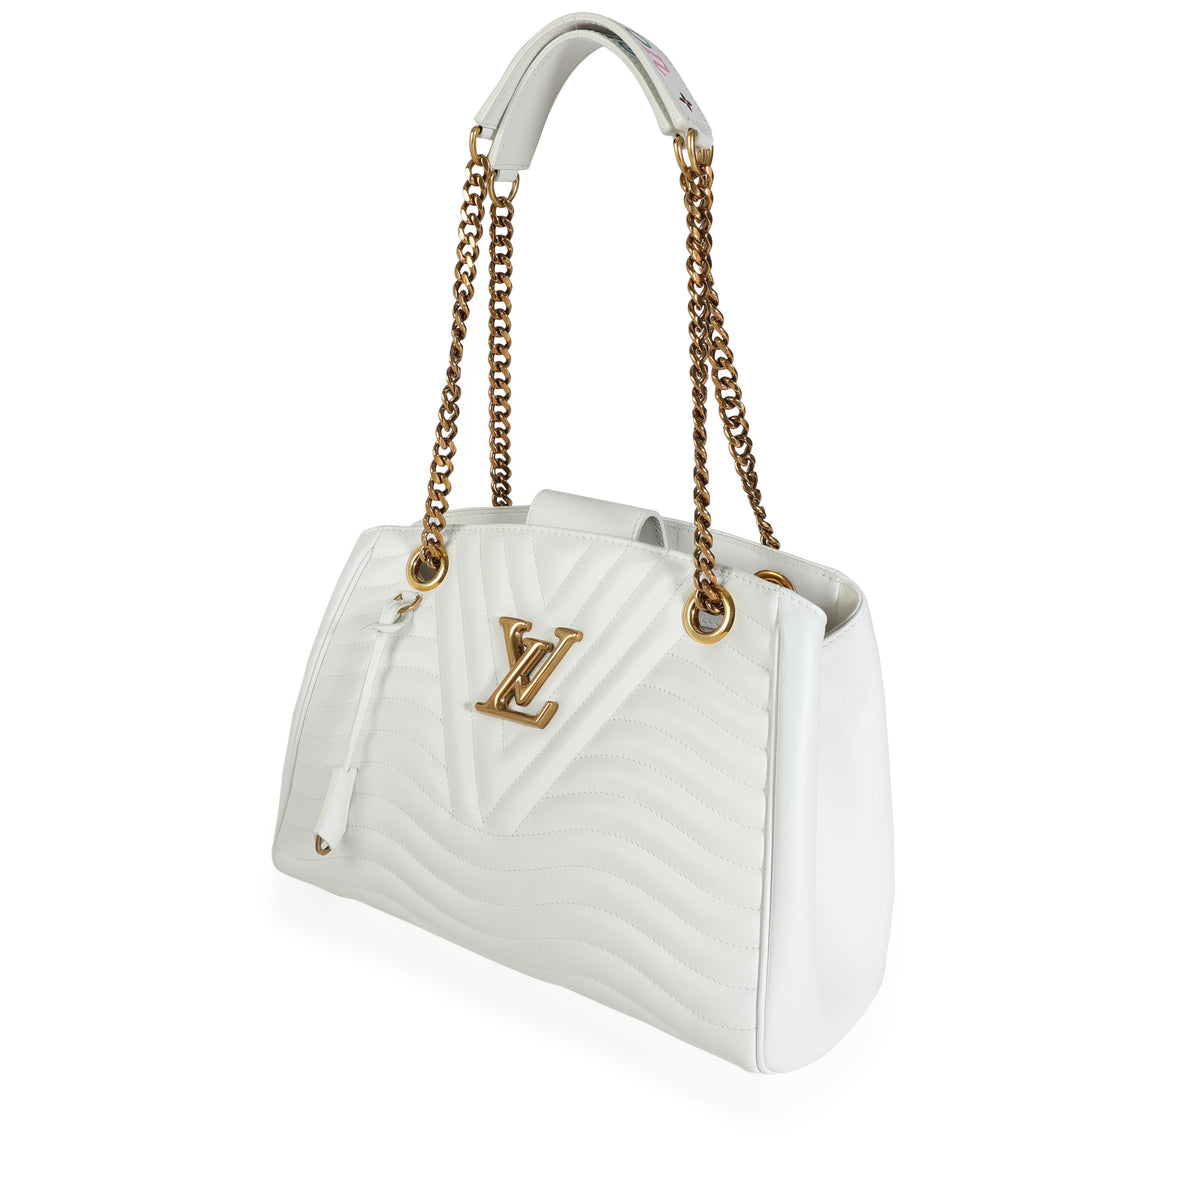 louis vuitton new wave tote